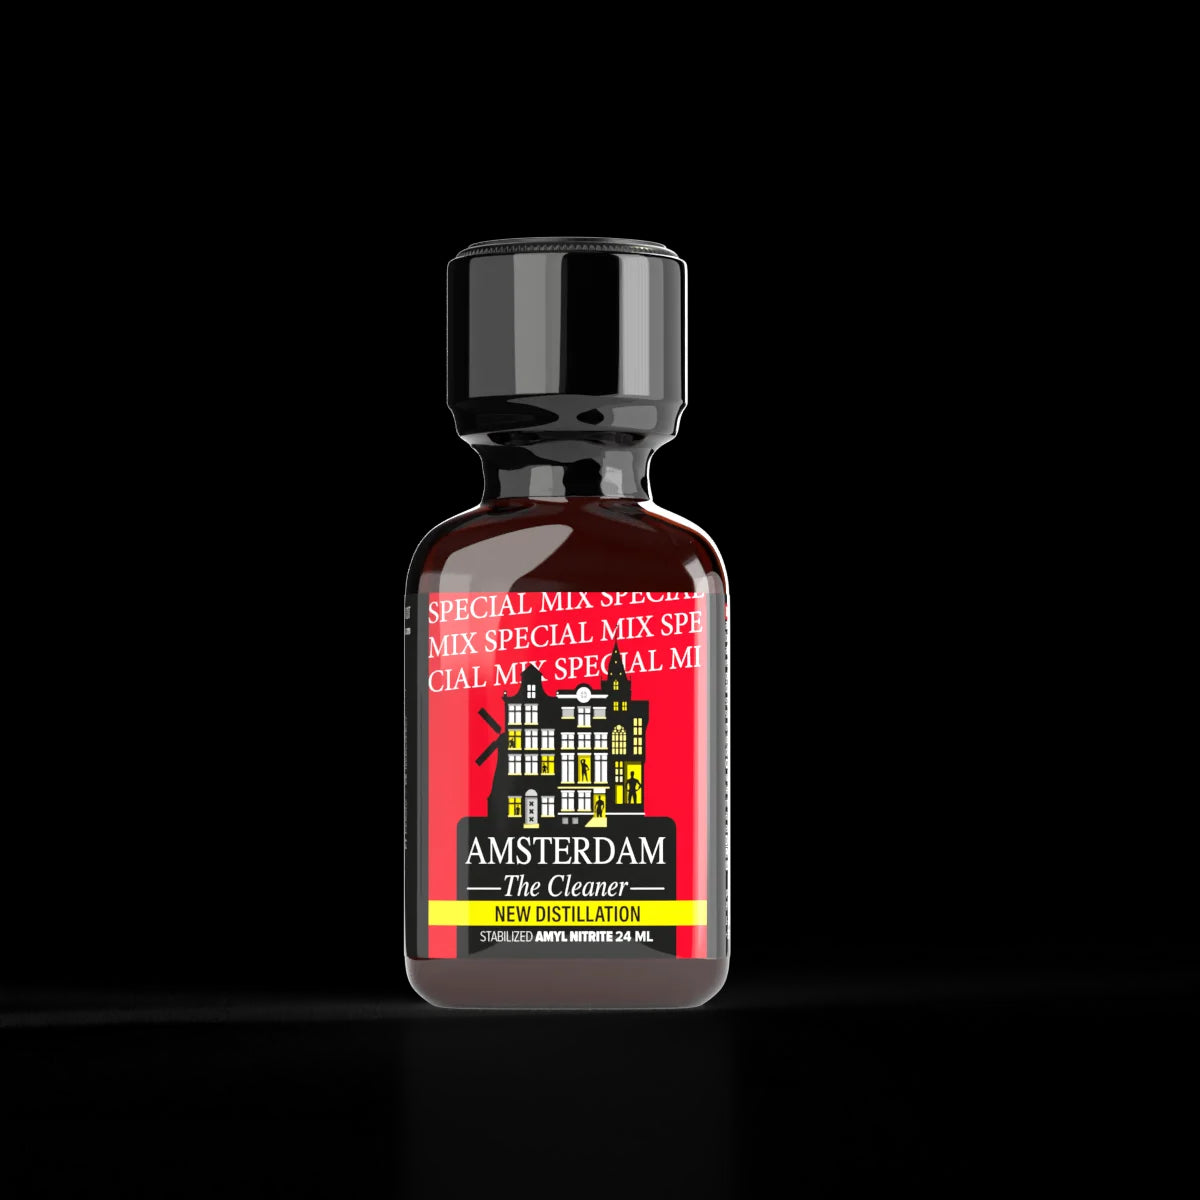 A product photo of a 24ml bottle of Amsterdam Special Poppers.